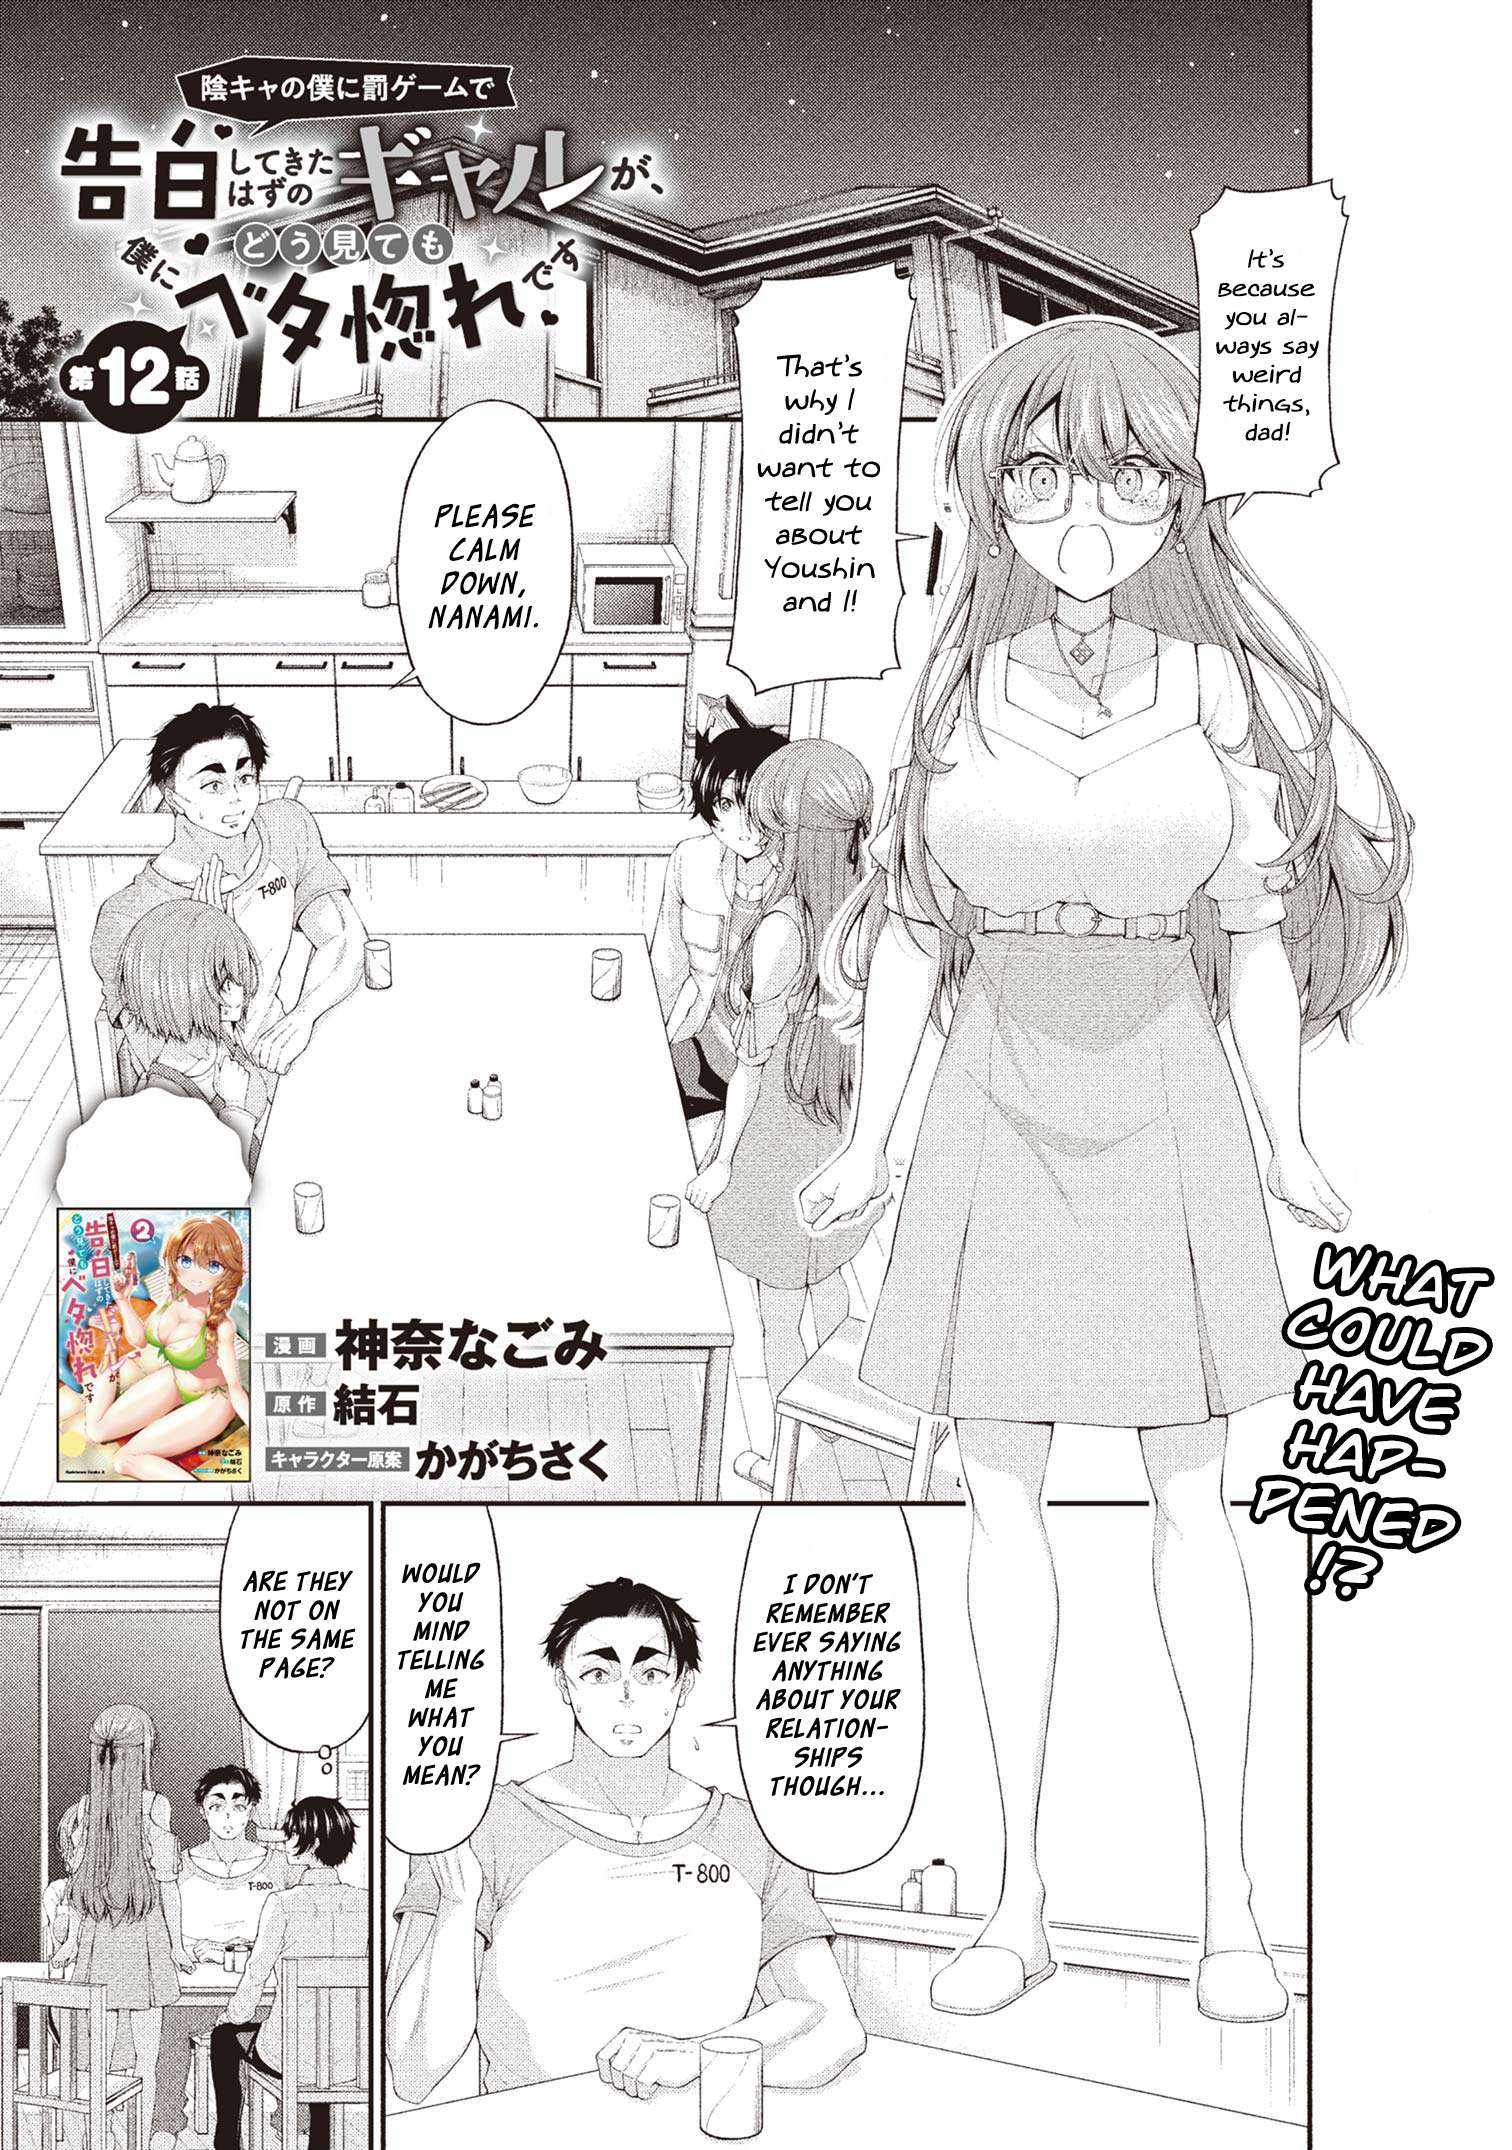 The Gal Who Was Meant to Confess to Me as a Game Punishment - chapter 12 - #1